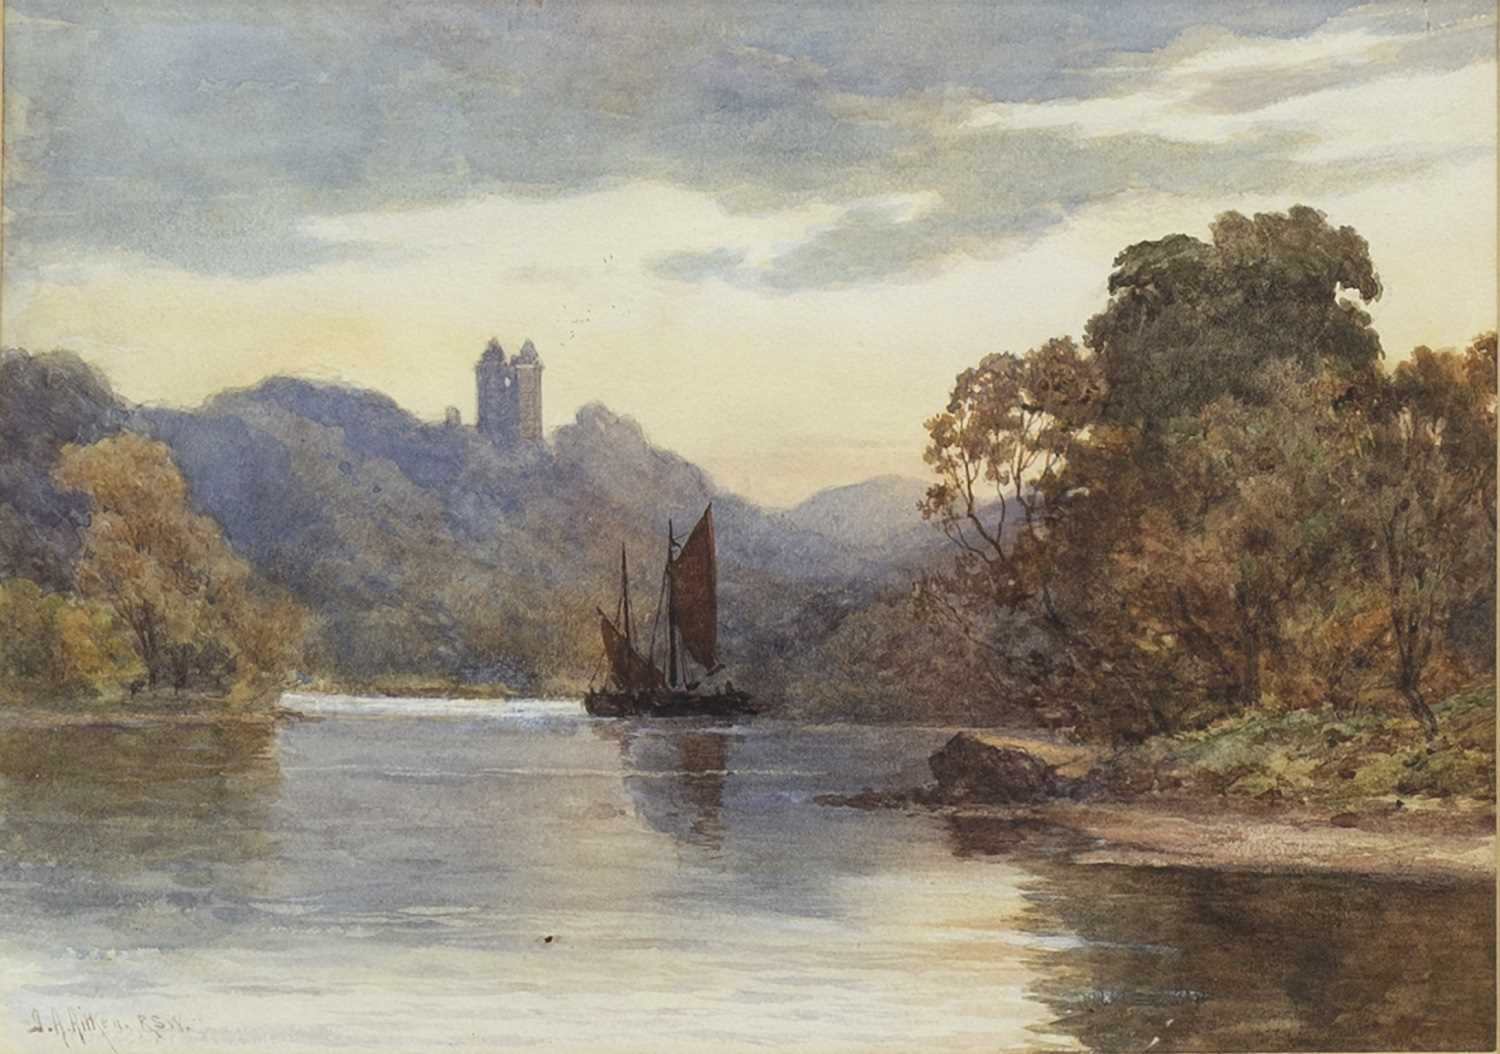 Lot 677 - RIVER SCENE, A WATERCOLOUR BY JAMES ALFRED AITKEN